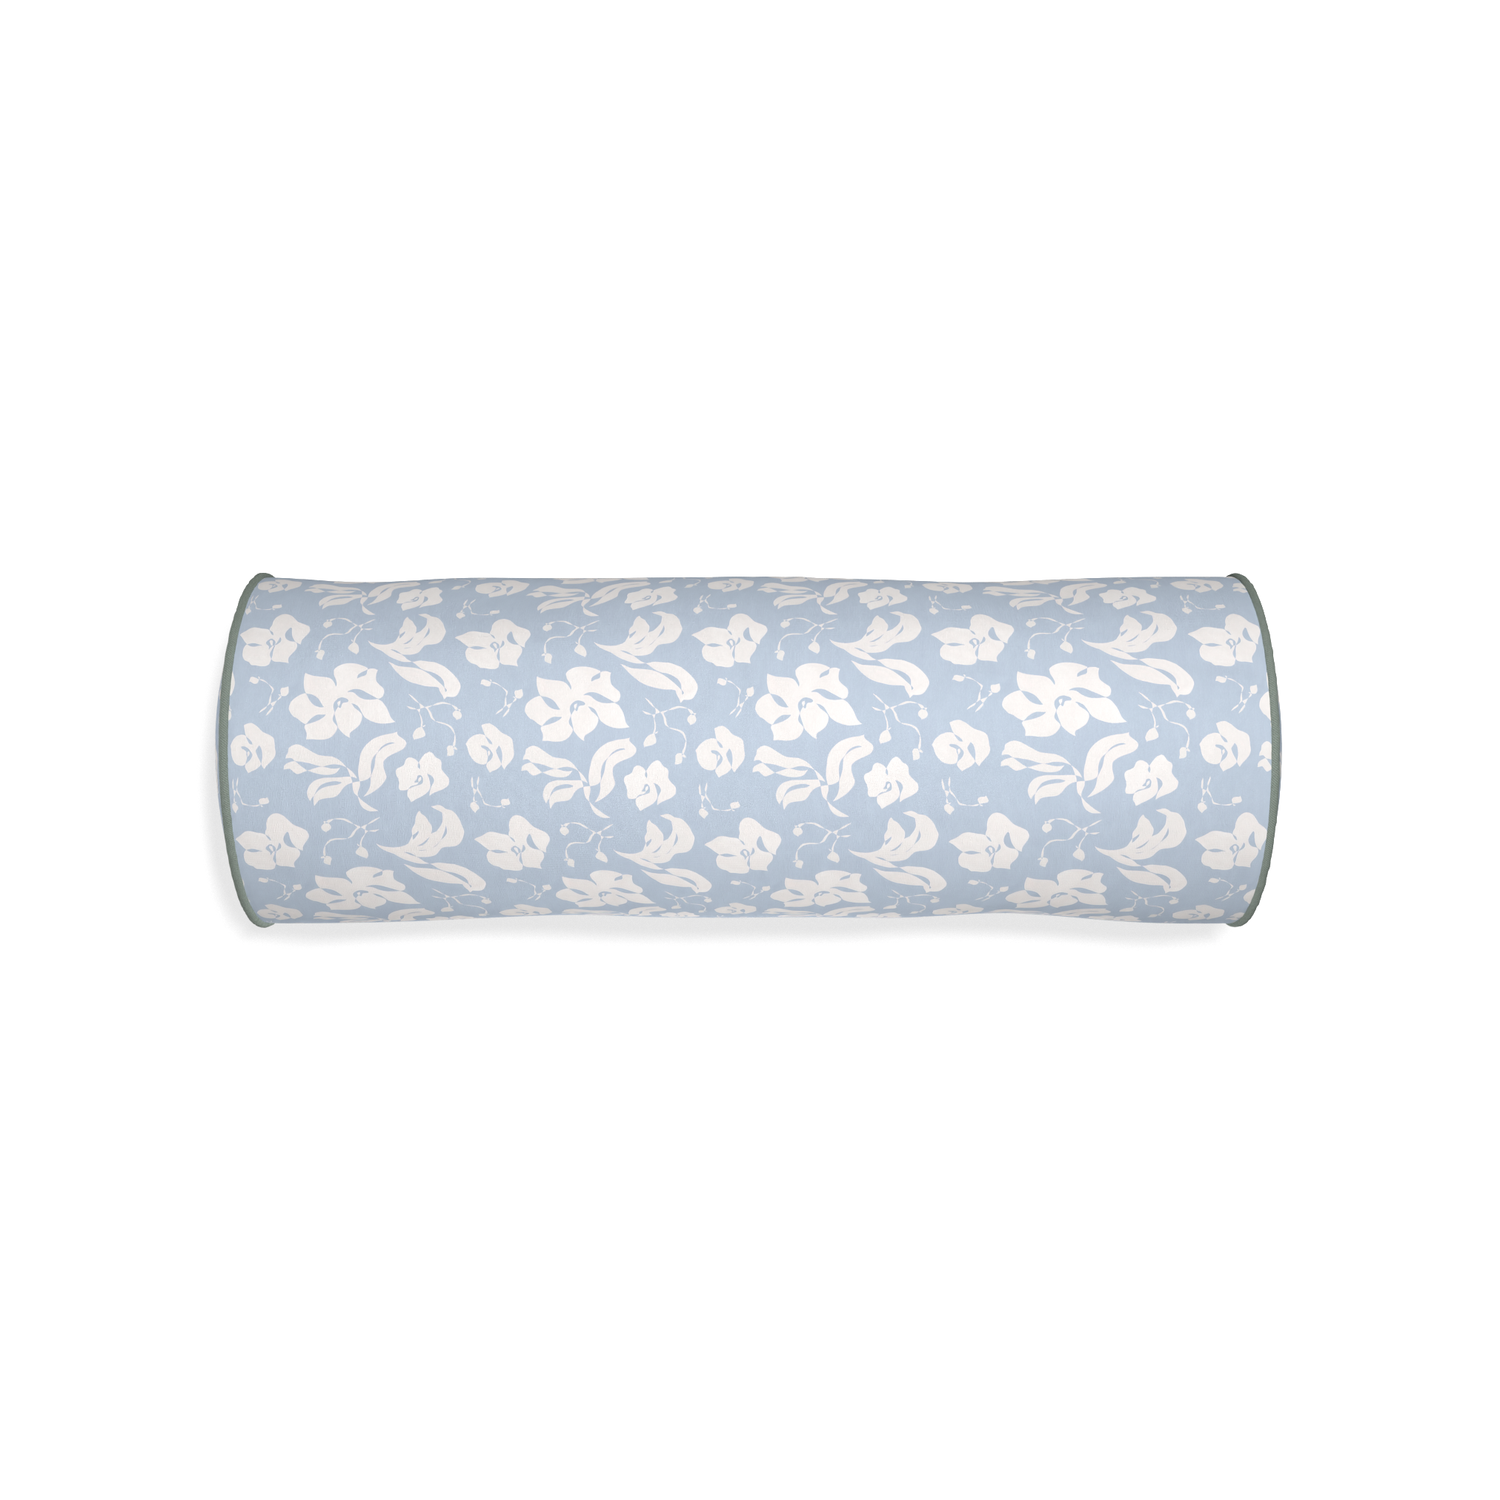 Bolster georgia custom cornflower blue floralpillow with sage piping on white background